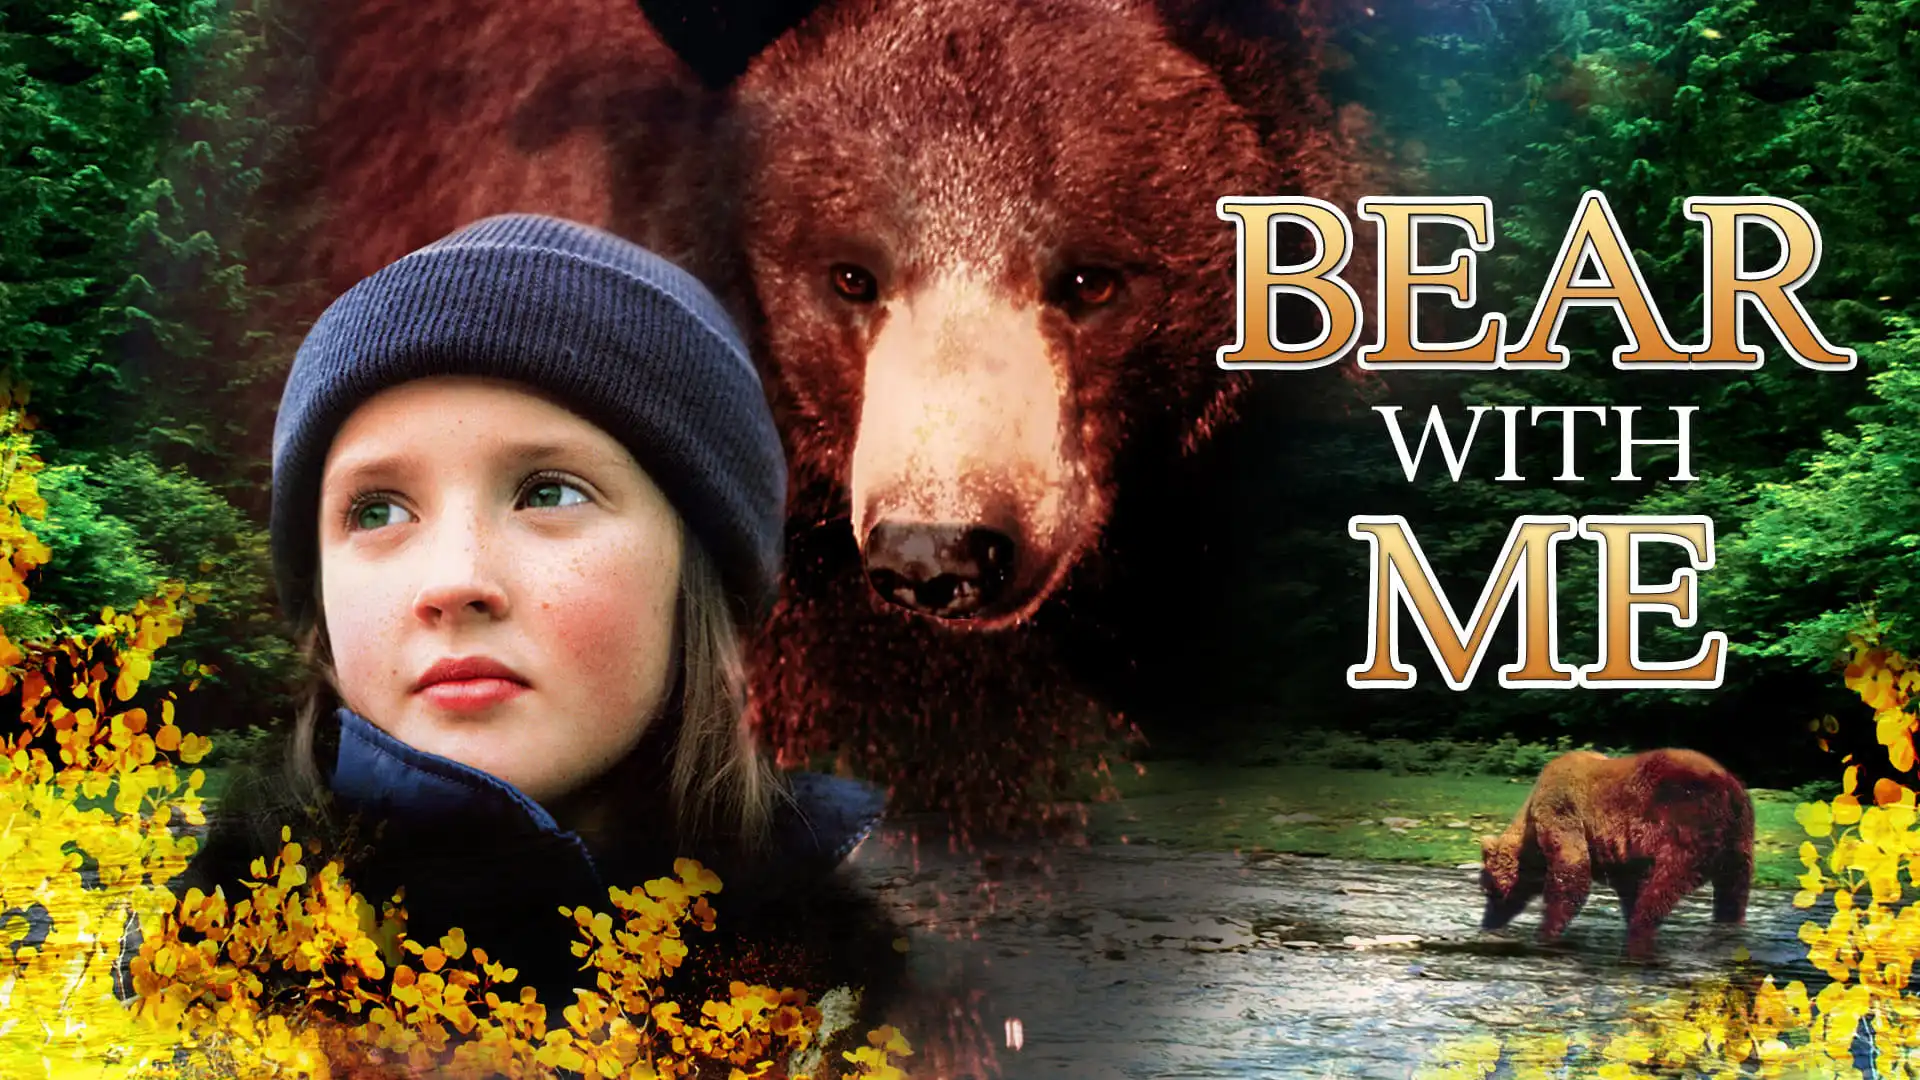 Watch and Download Bear with Me 1